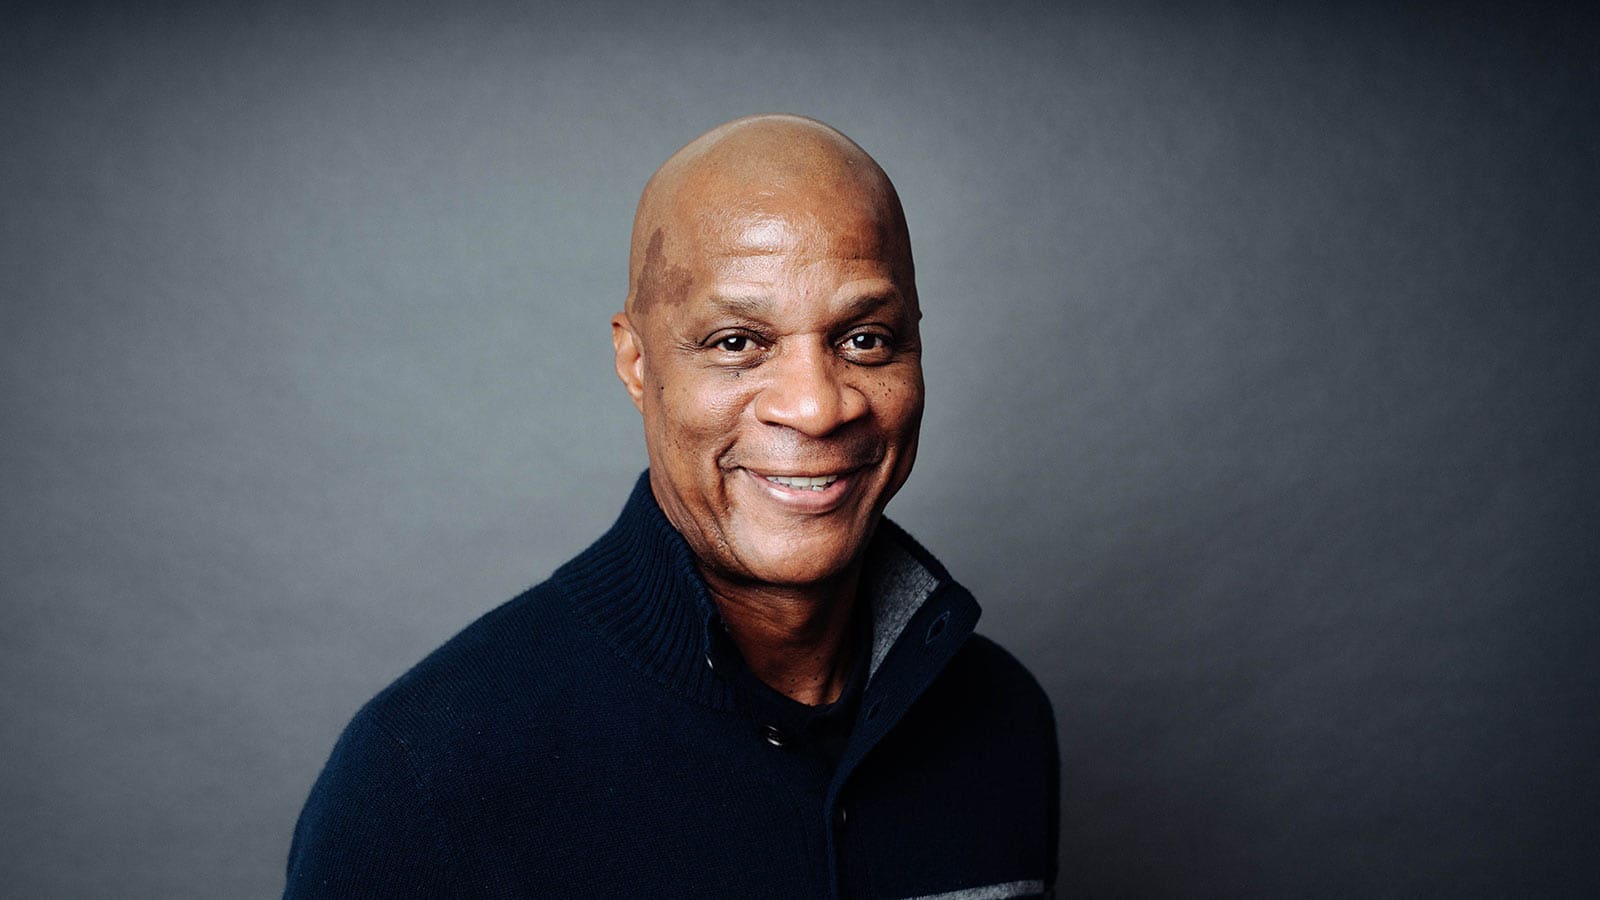 Darryl Strawberry Recovering From Heart Attack – ‘All is Well’